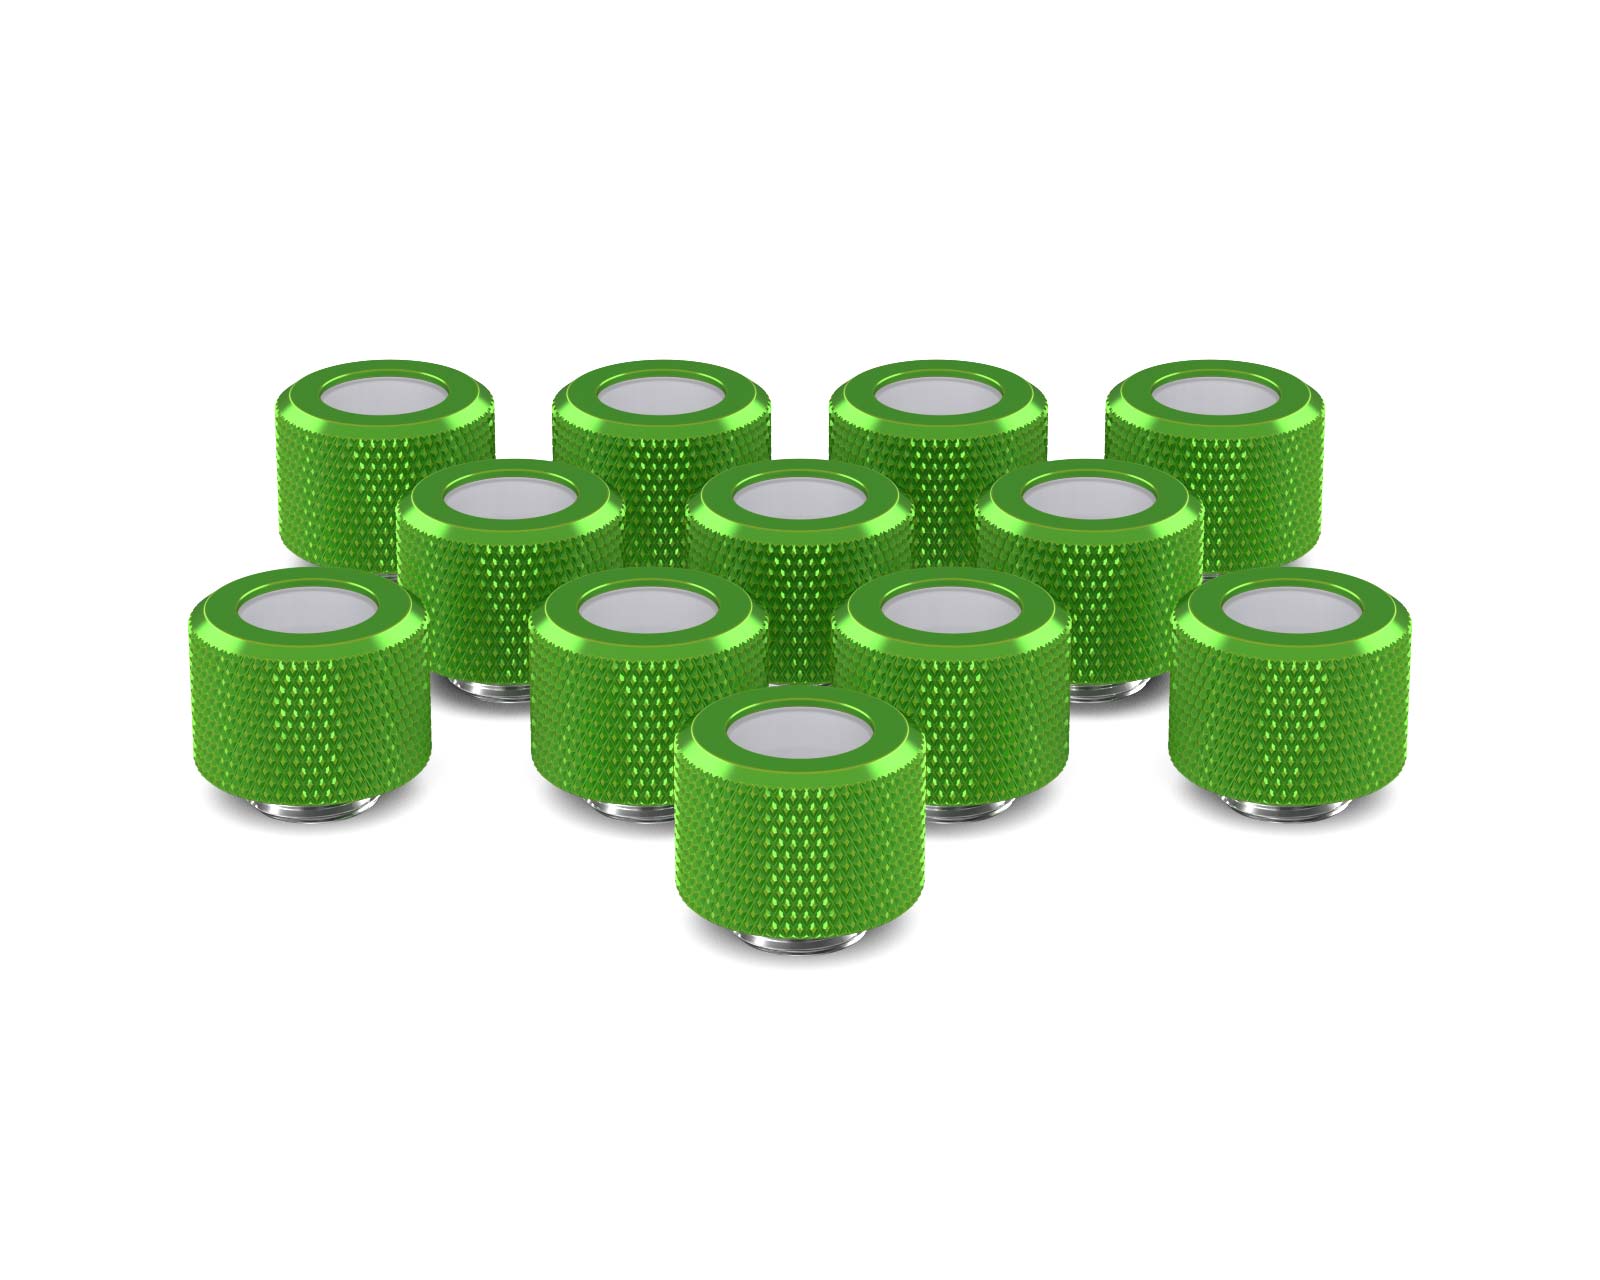 PrimoChill 12mm OD Rigid SX Fitting - 12 Pack - PrimoChill - KEEPING IT COOL Toxic Candy